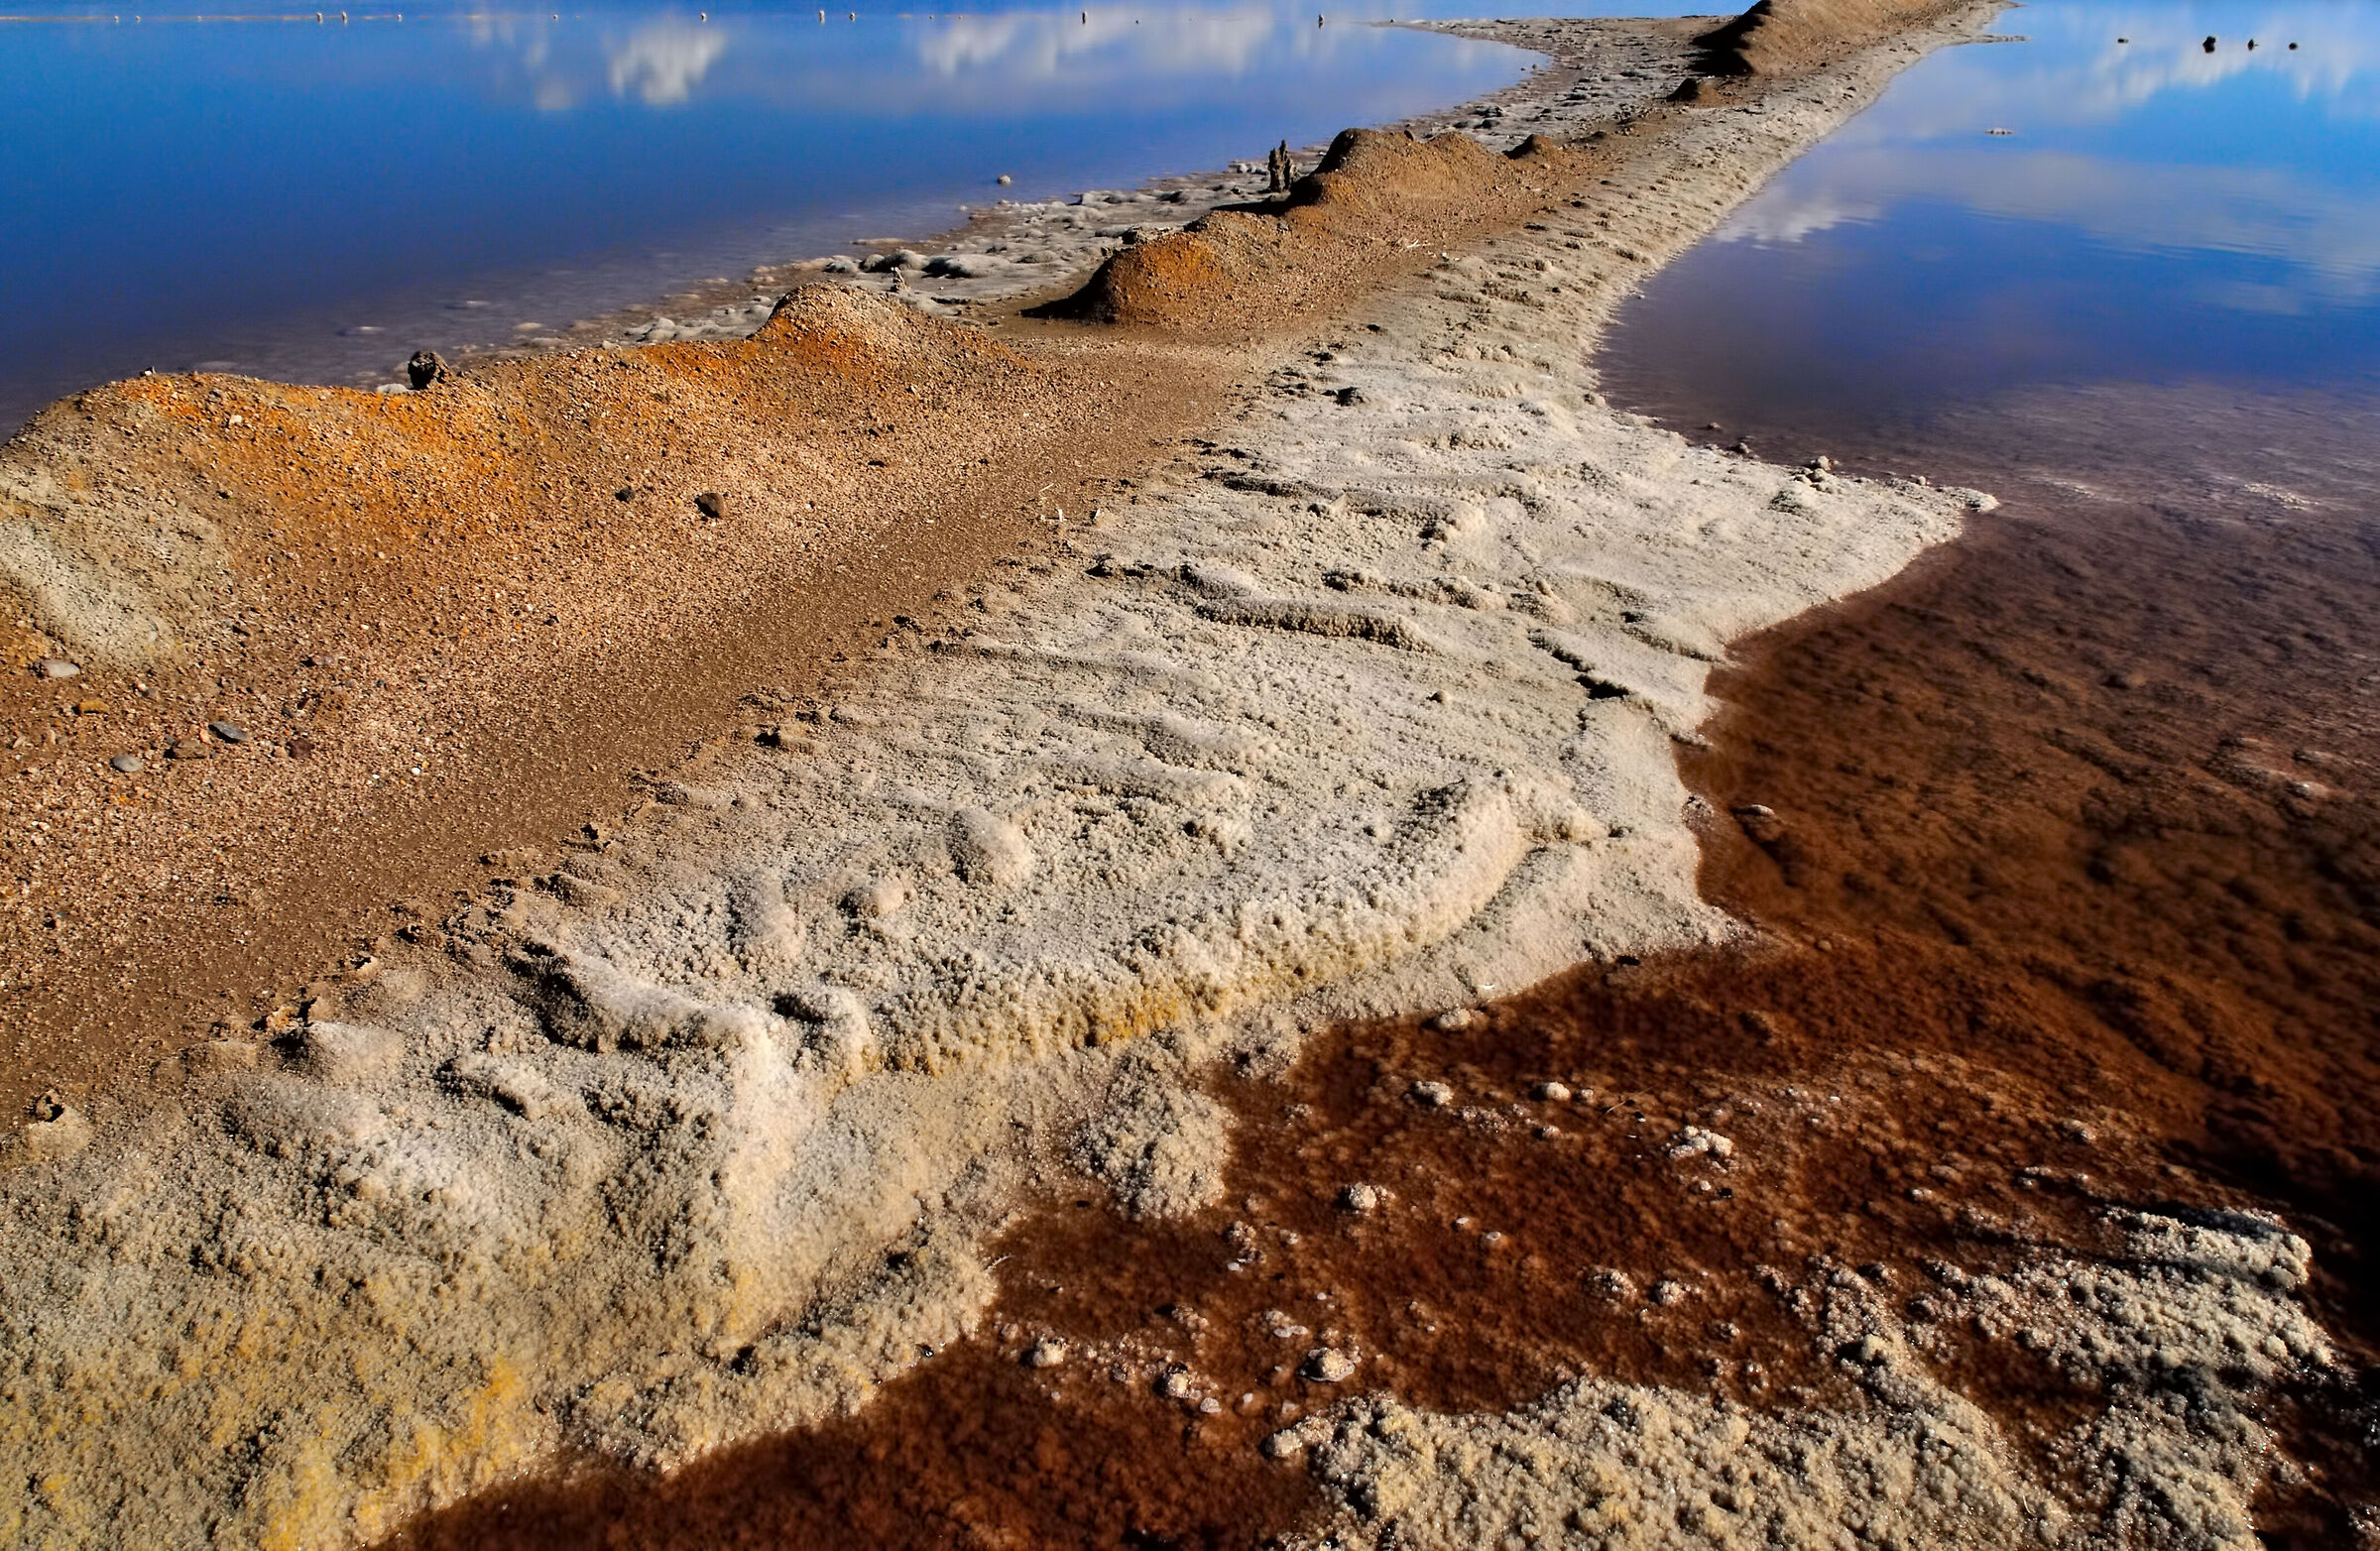 The colors of the salt pan...